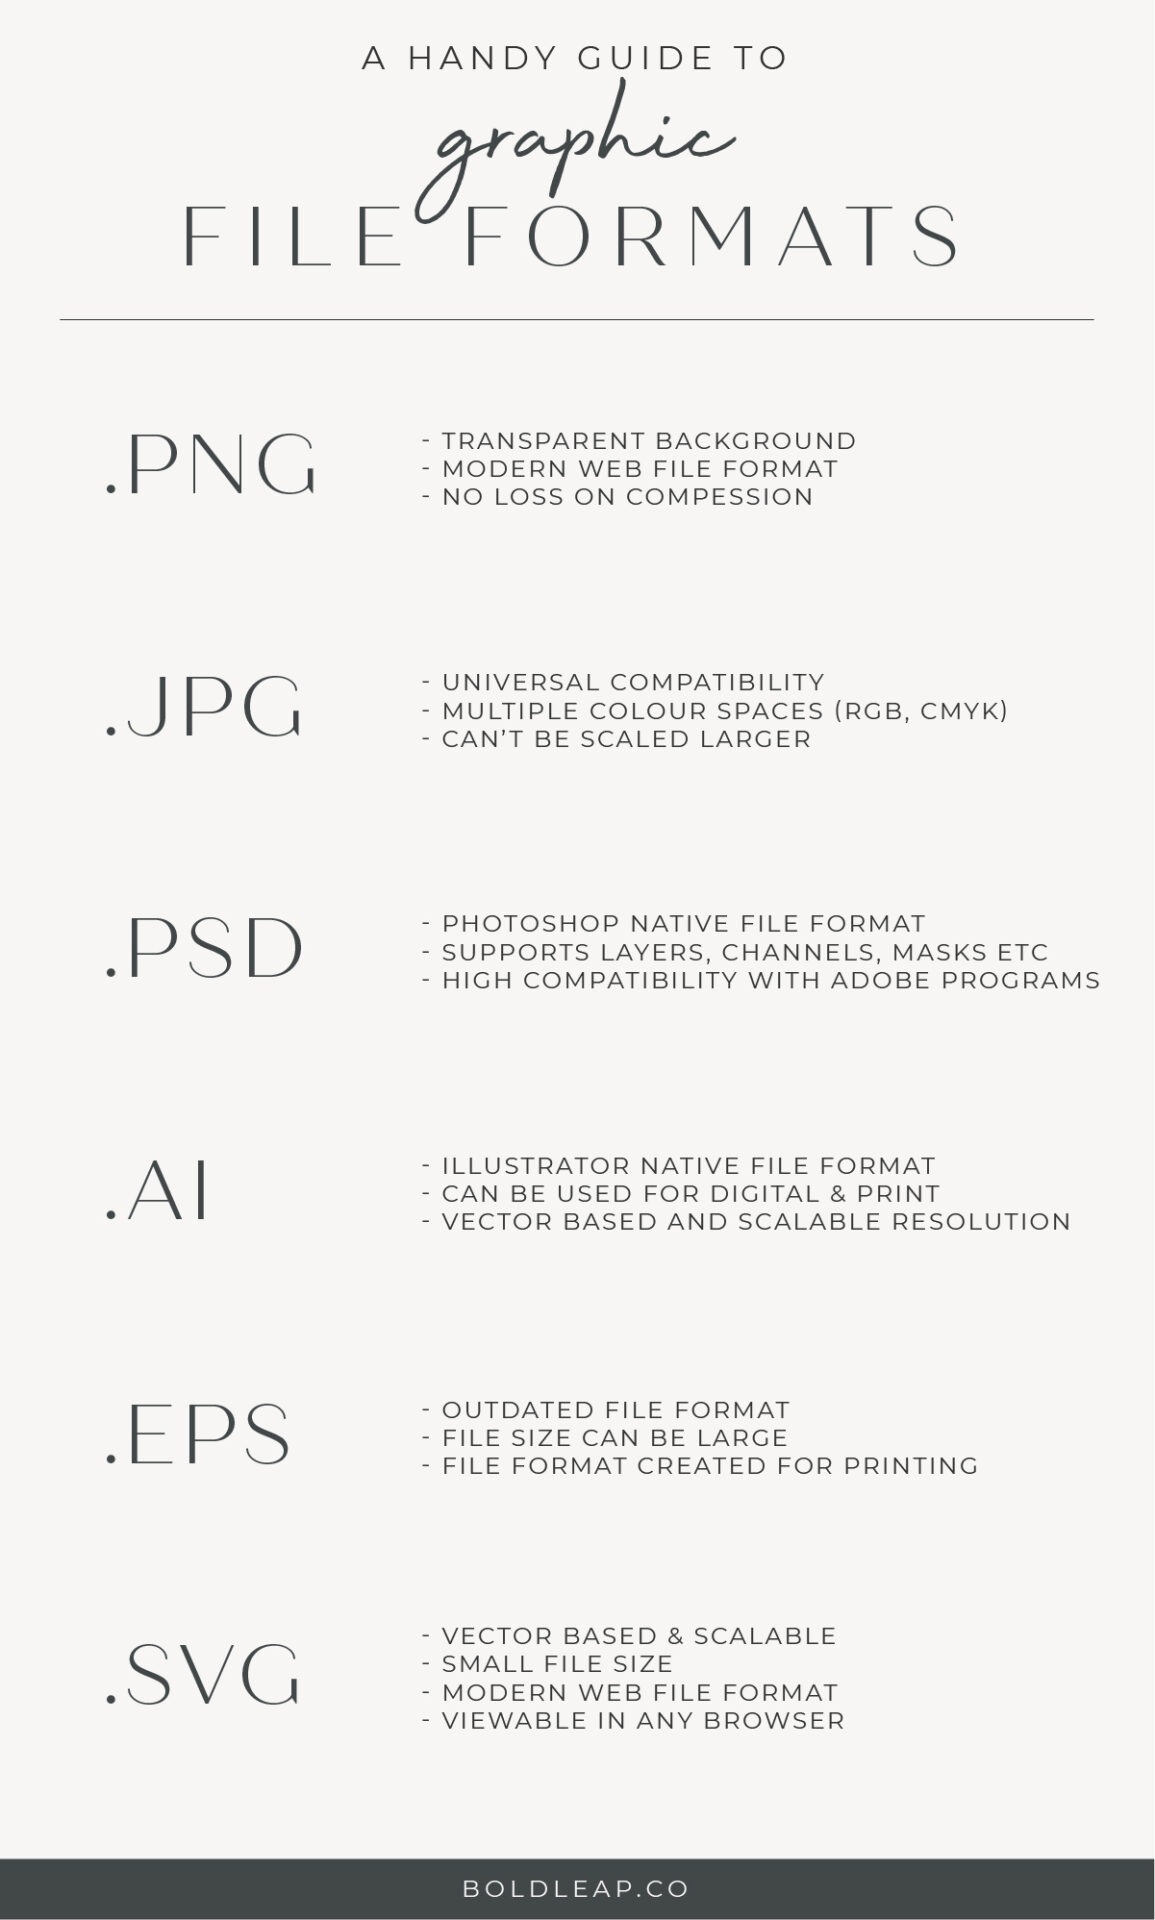 A Handy Guide To Graphic File Formats